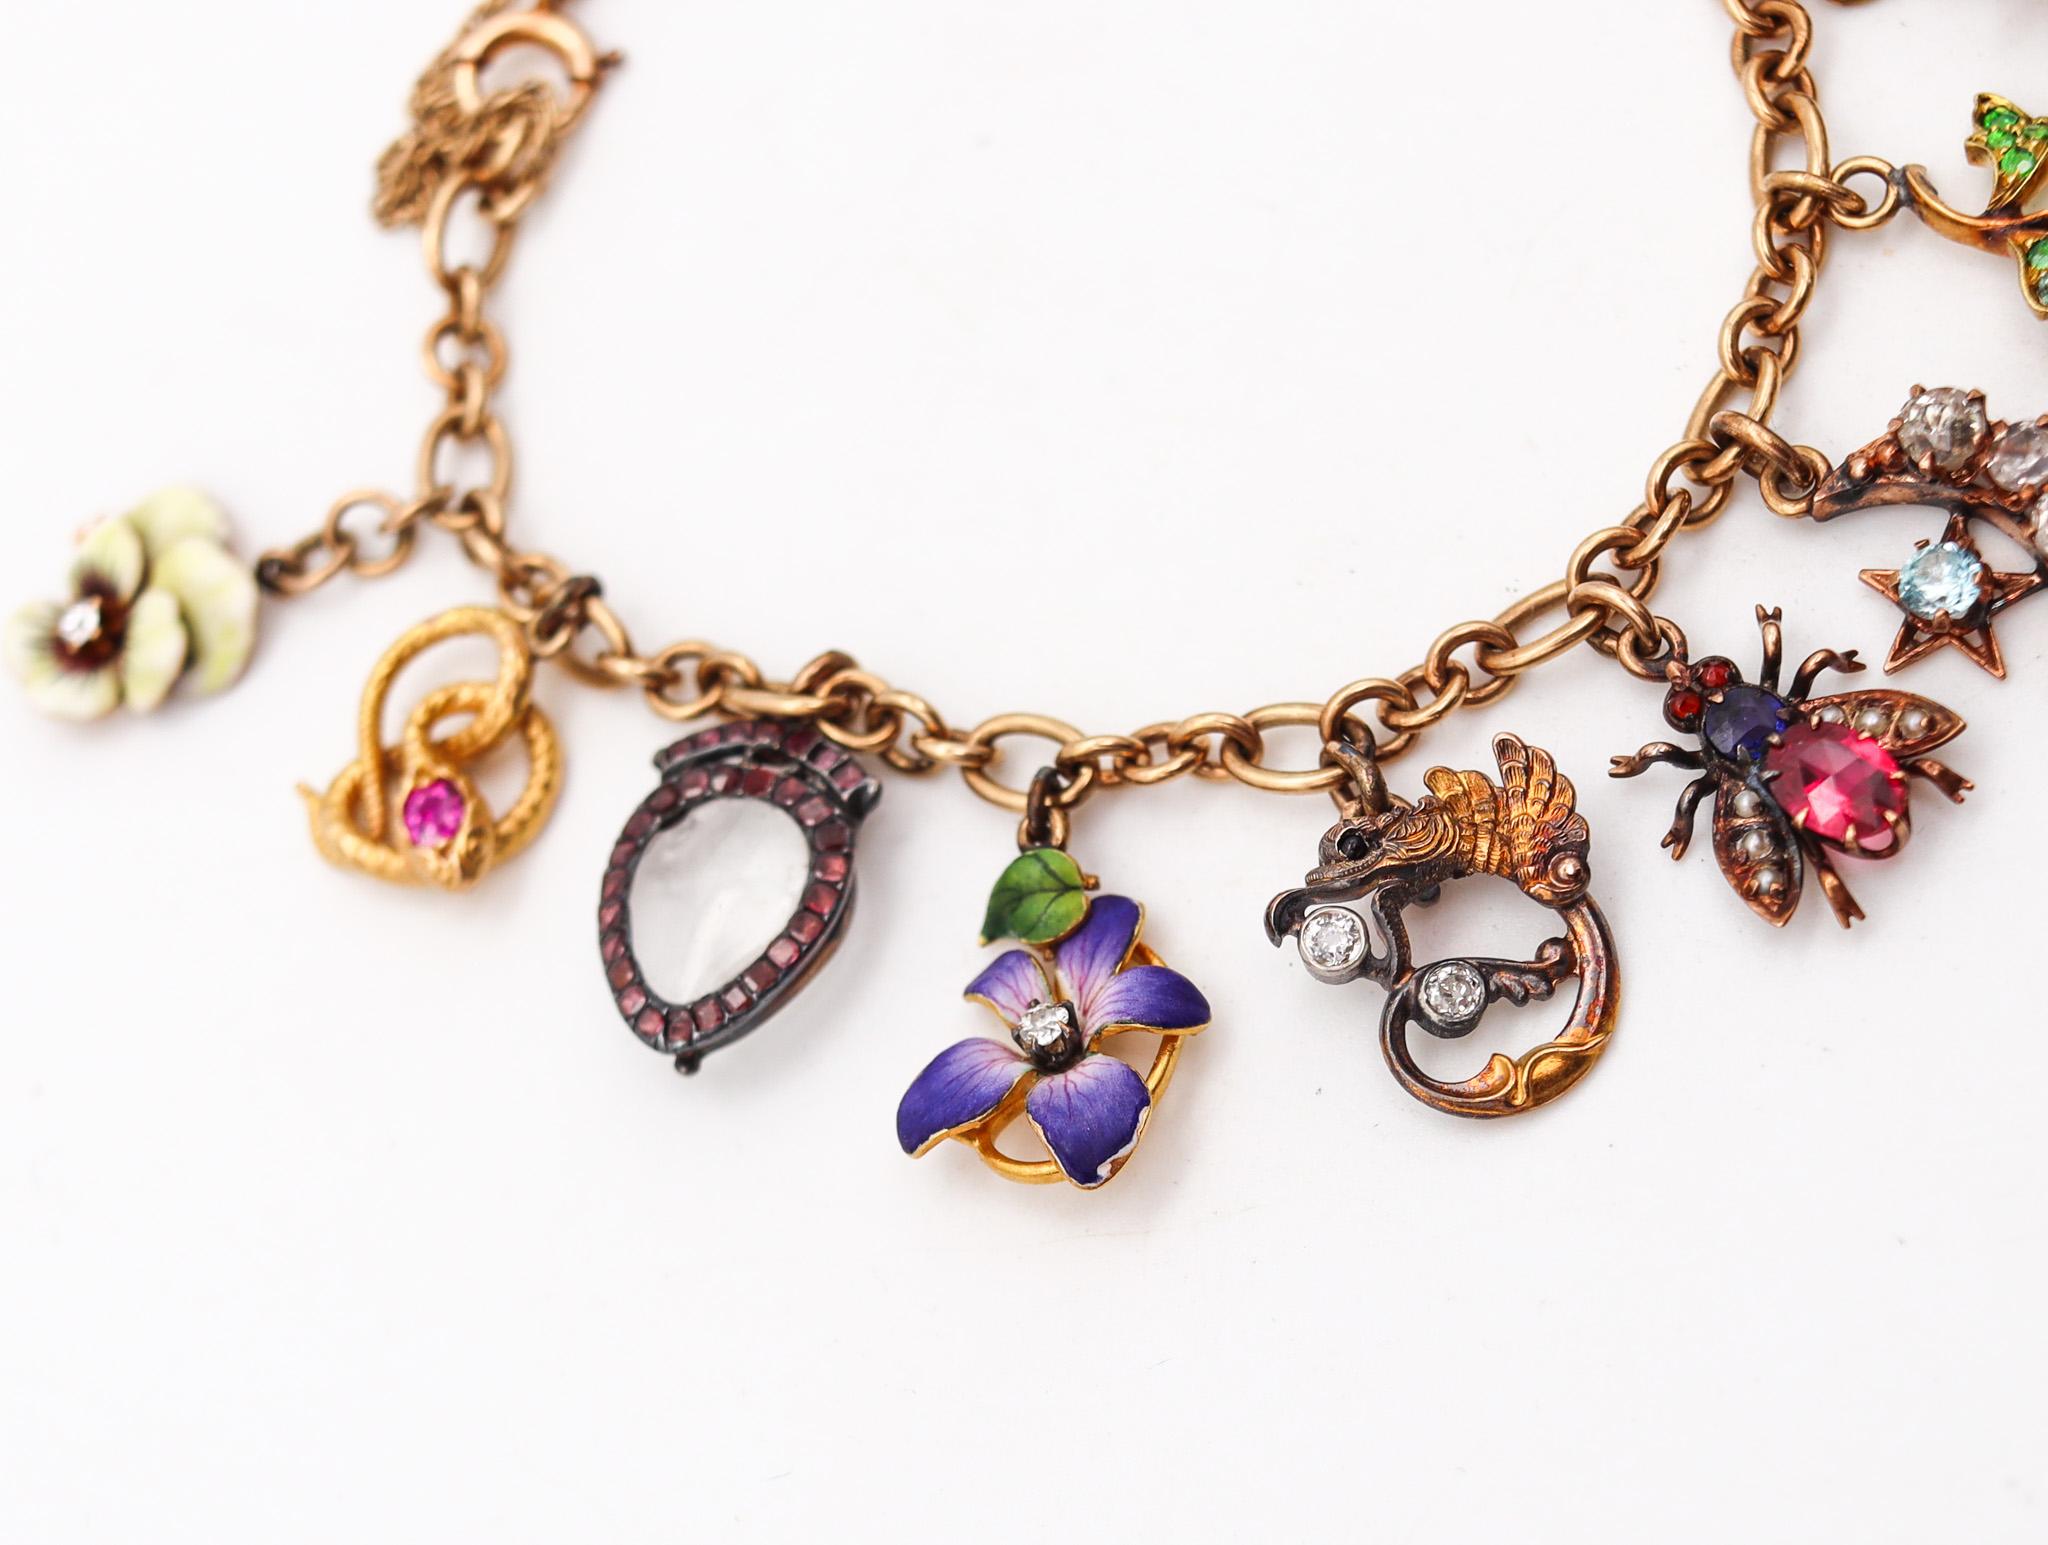 Mixed Cut Art Nouveau 1910 Charms Bracelet In 14Kt Gold With Multi Gemstones And Enamels For Sale